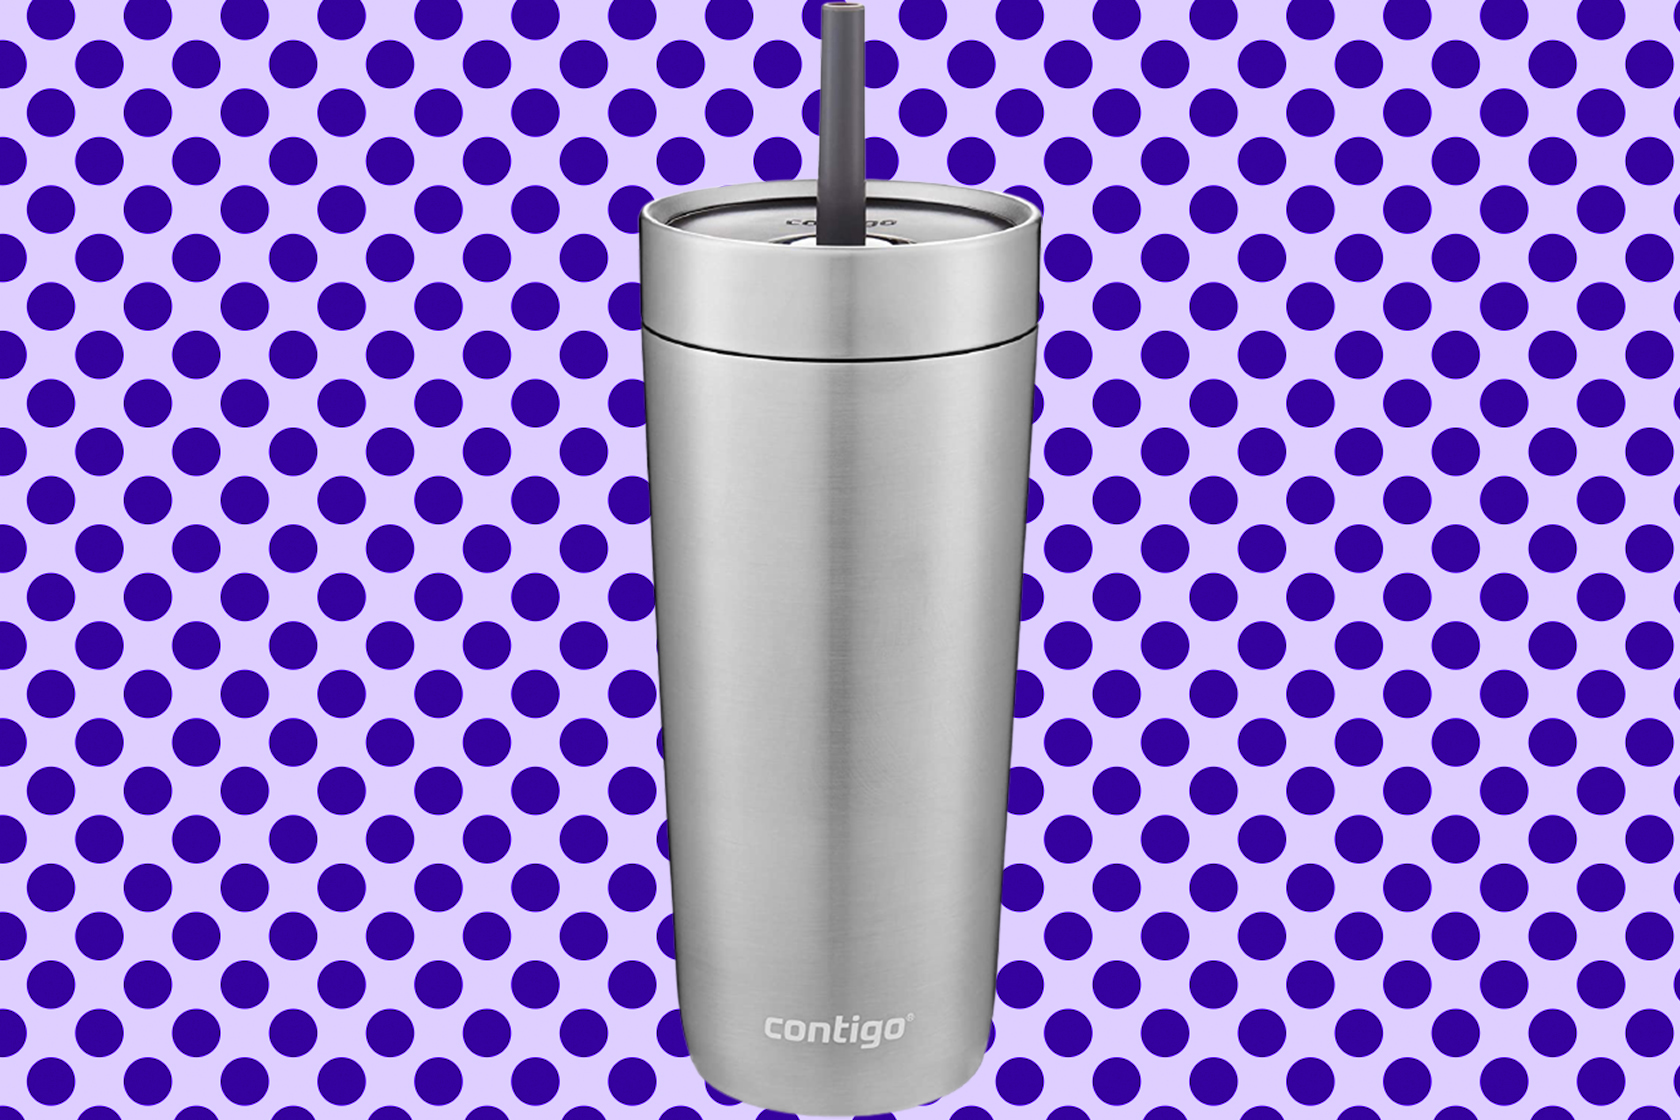 Luxe Stainless Steel Travel Tumbler with Spill-Proof Lid and Straw